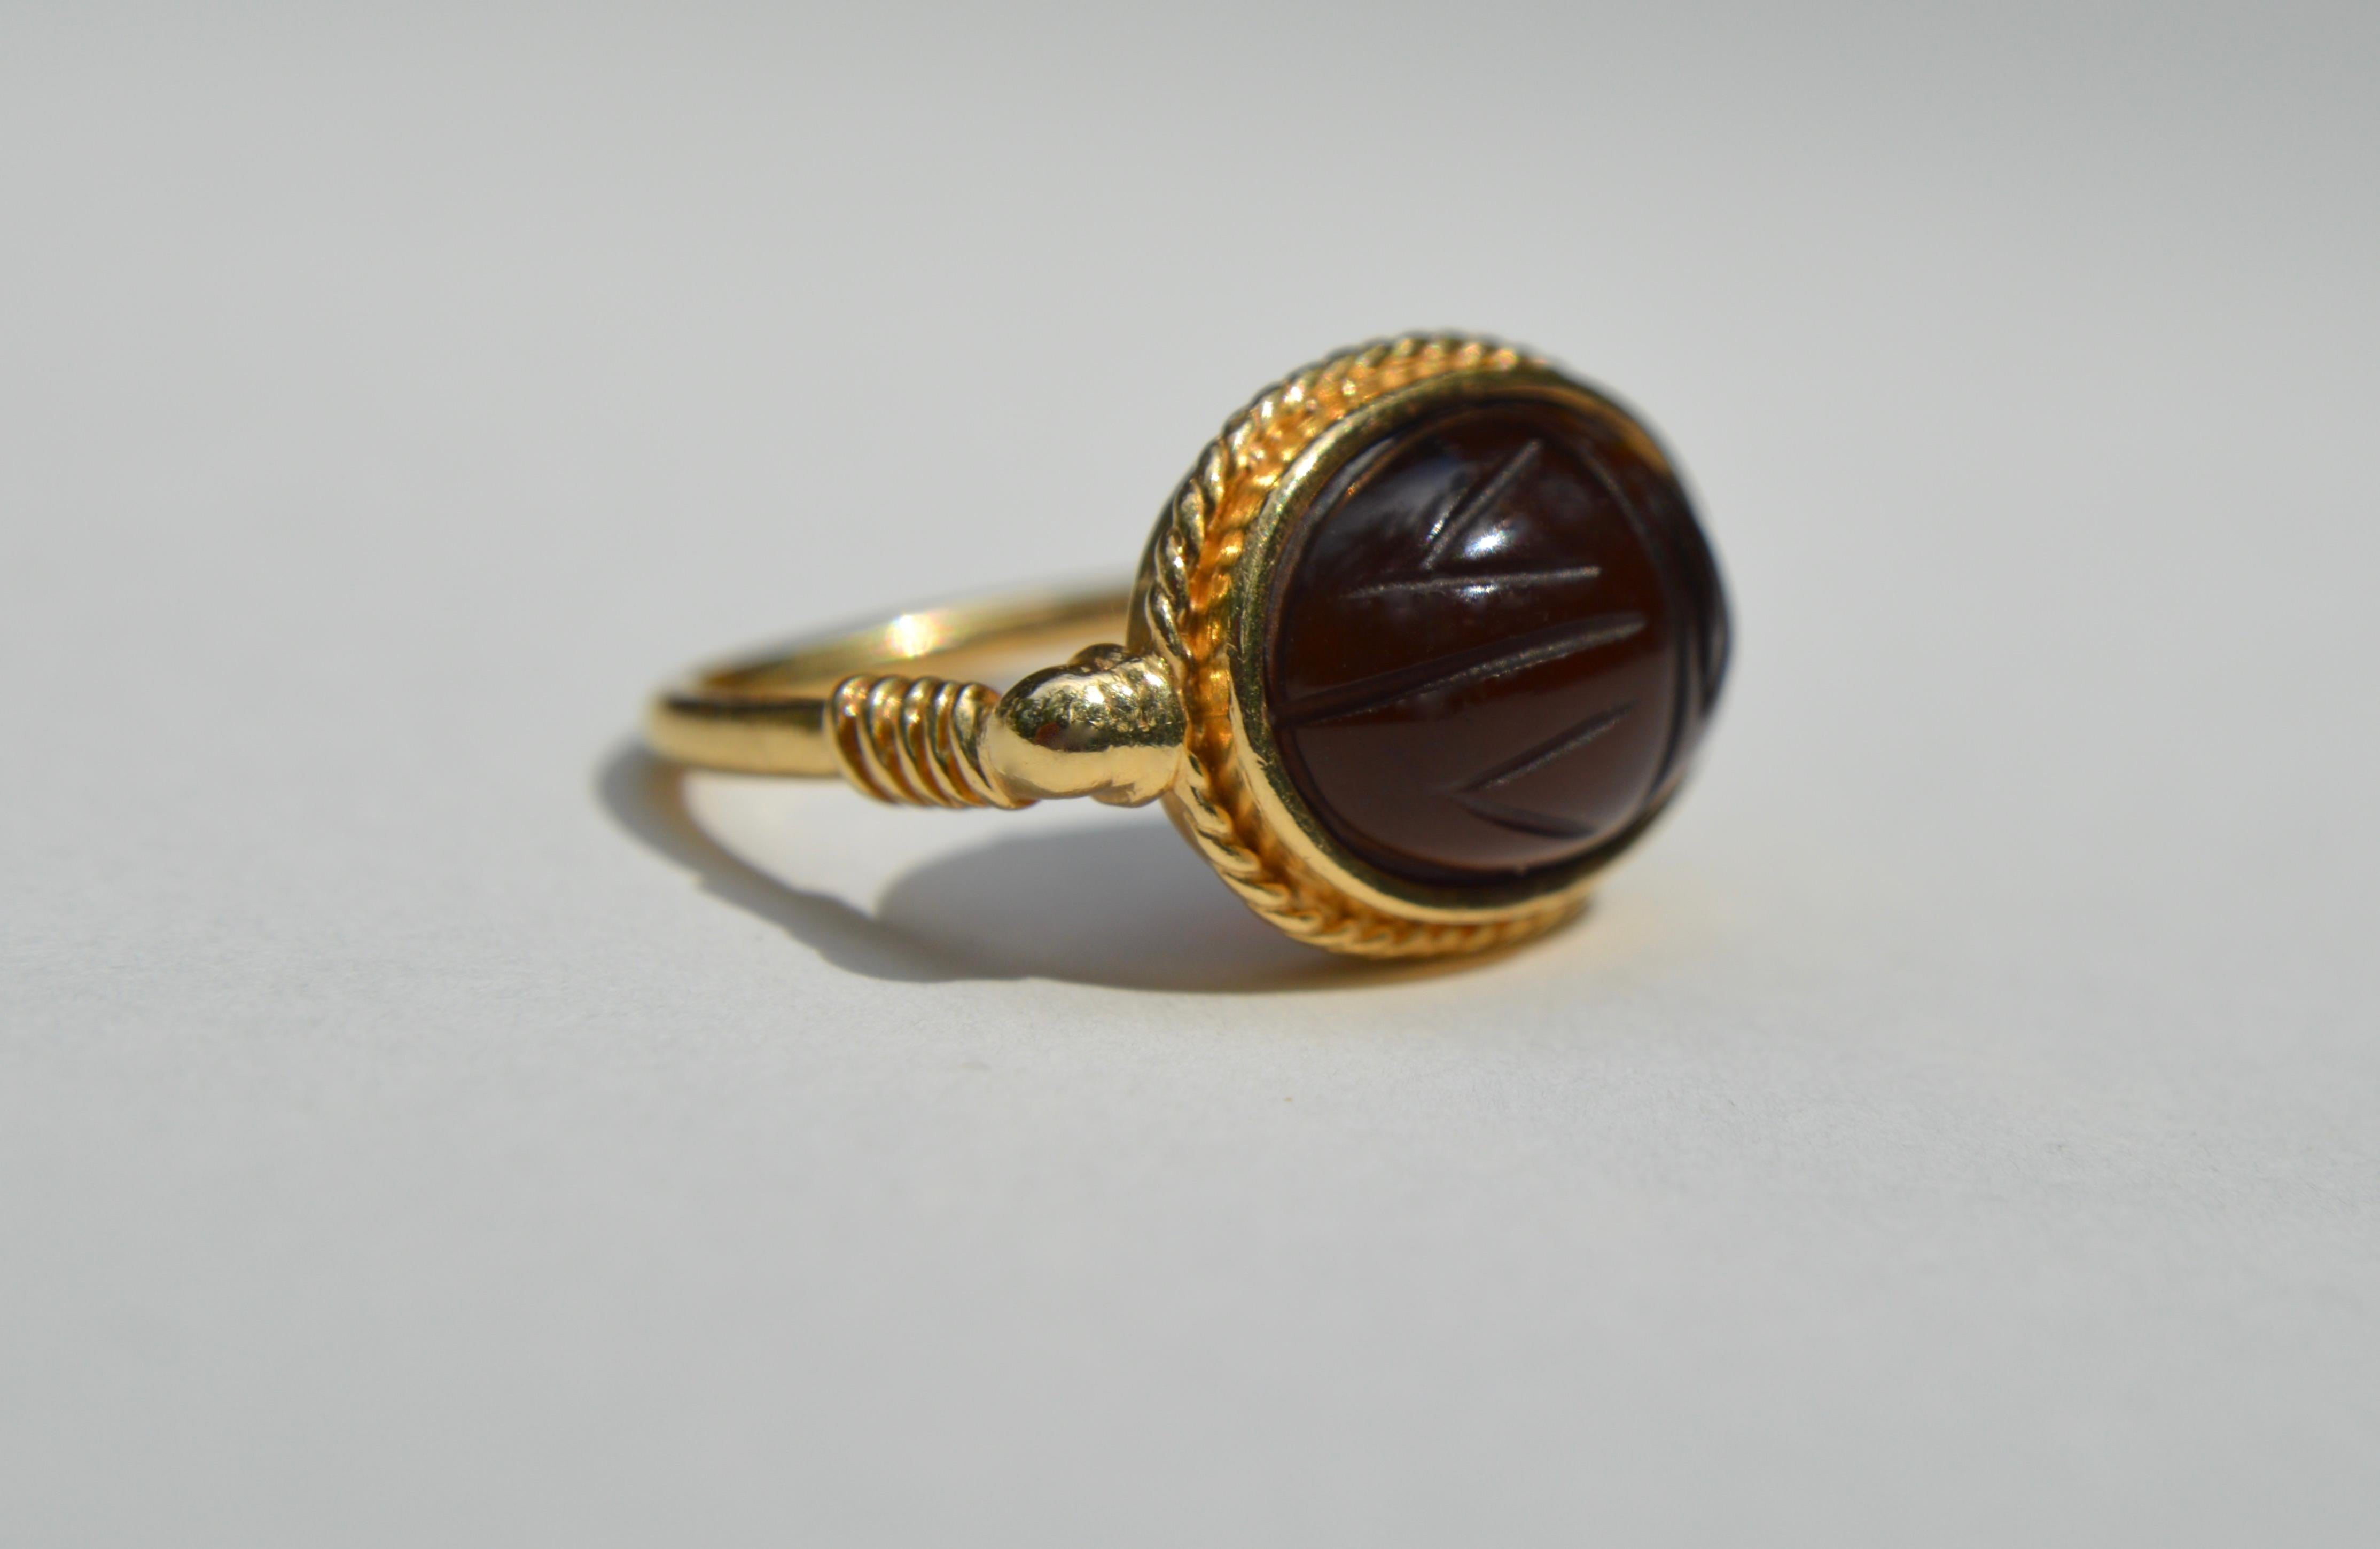 Beautiful vintage c1990s Egyptian revival, rich root beer hued Baltic amber carved scarab beetle ring in 14K yellow gold. Size 6.5. In excellent condition. Marked as 14K and Multilana (a fine jeweler specializing in museum reproductions). Amber